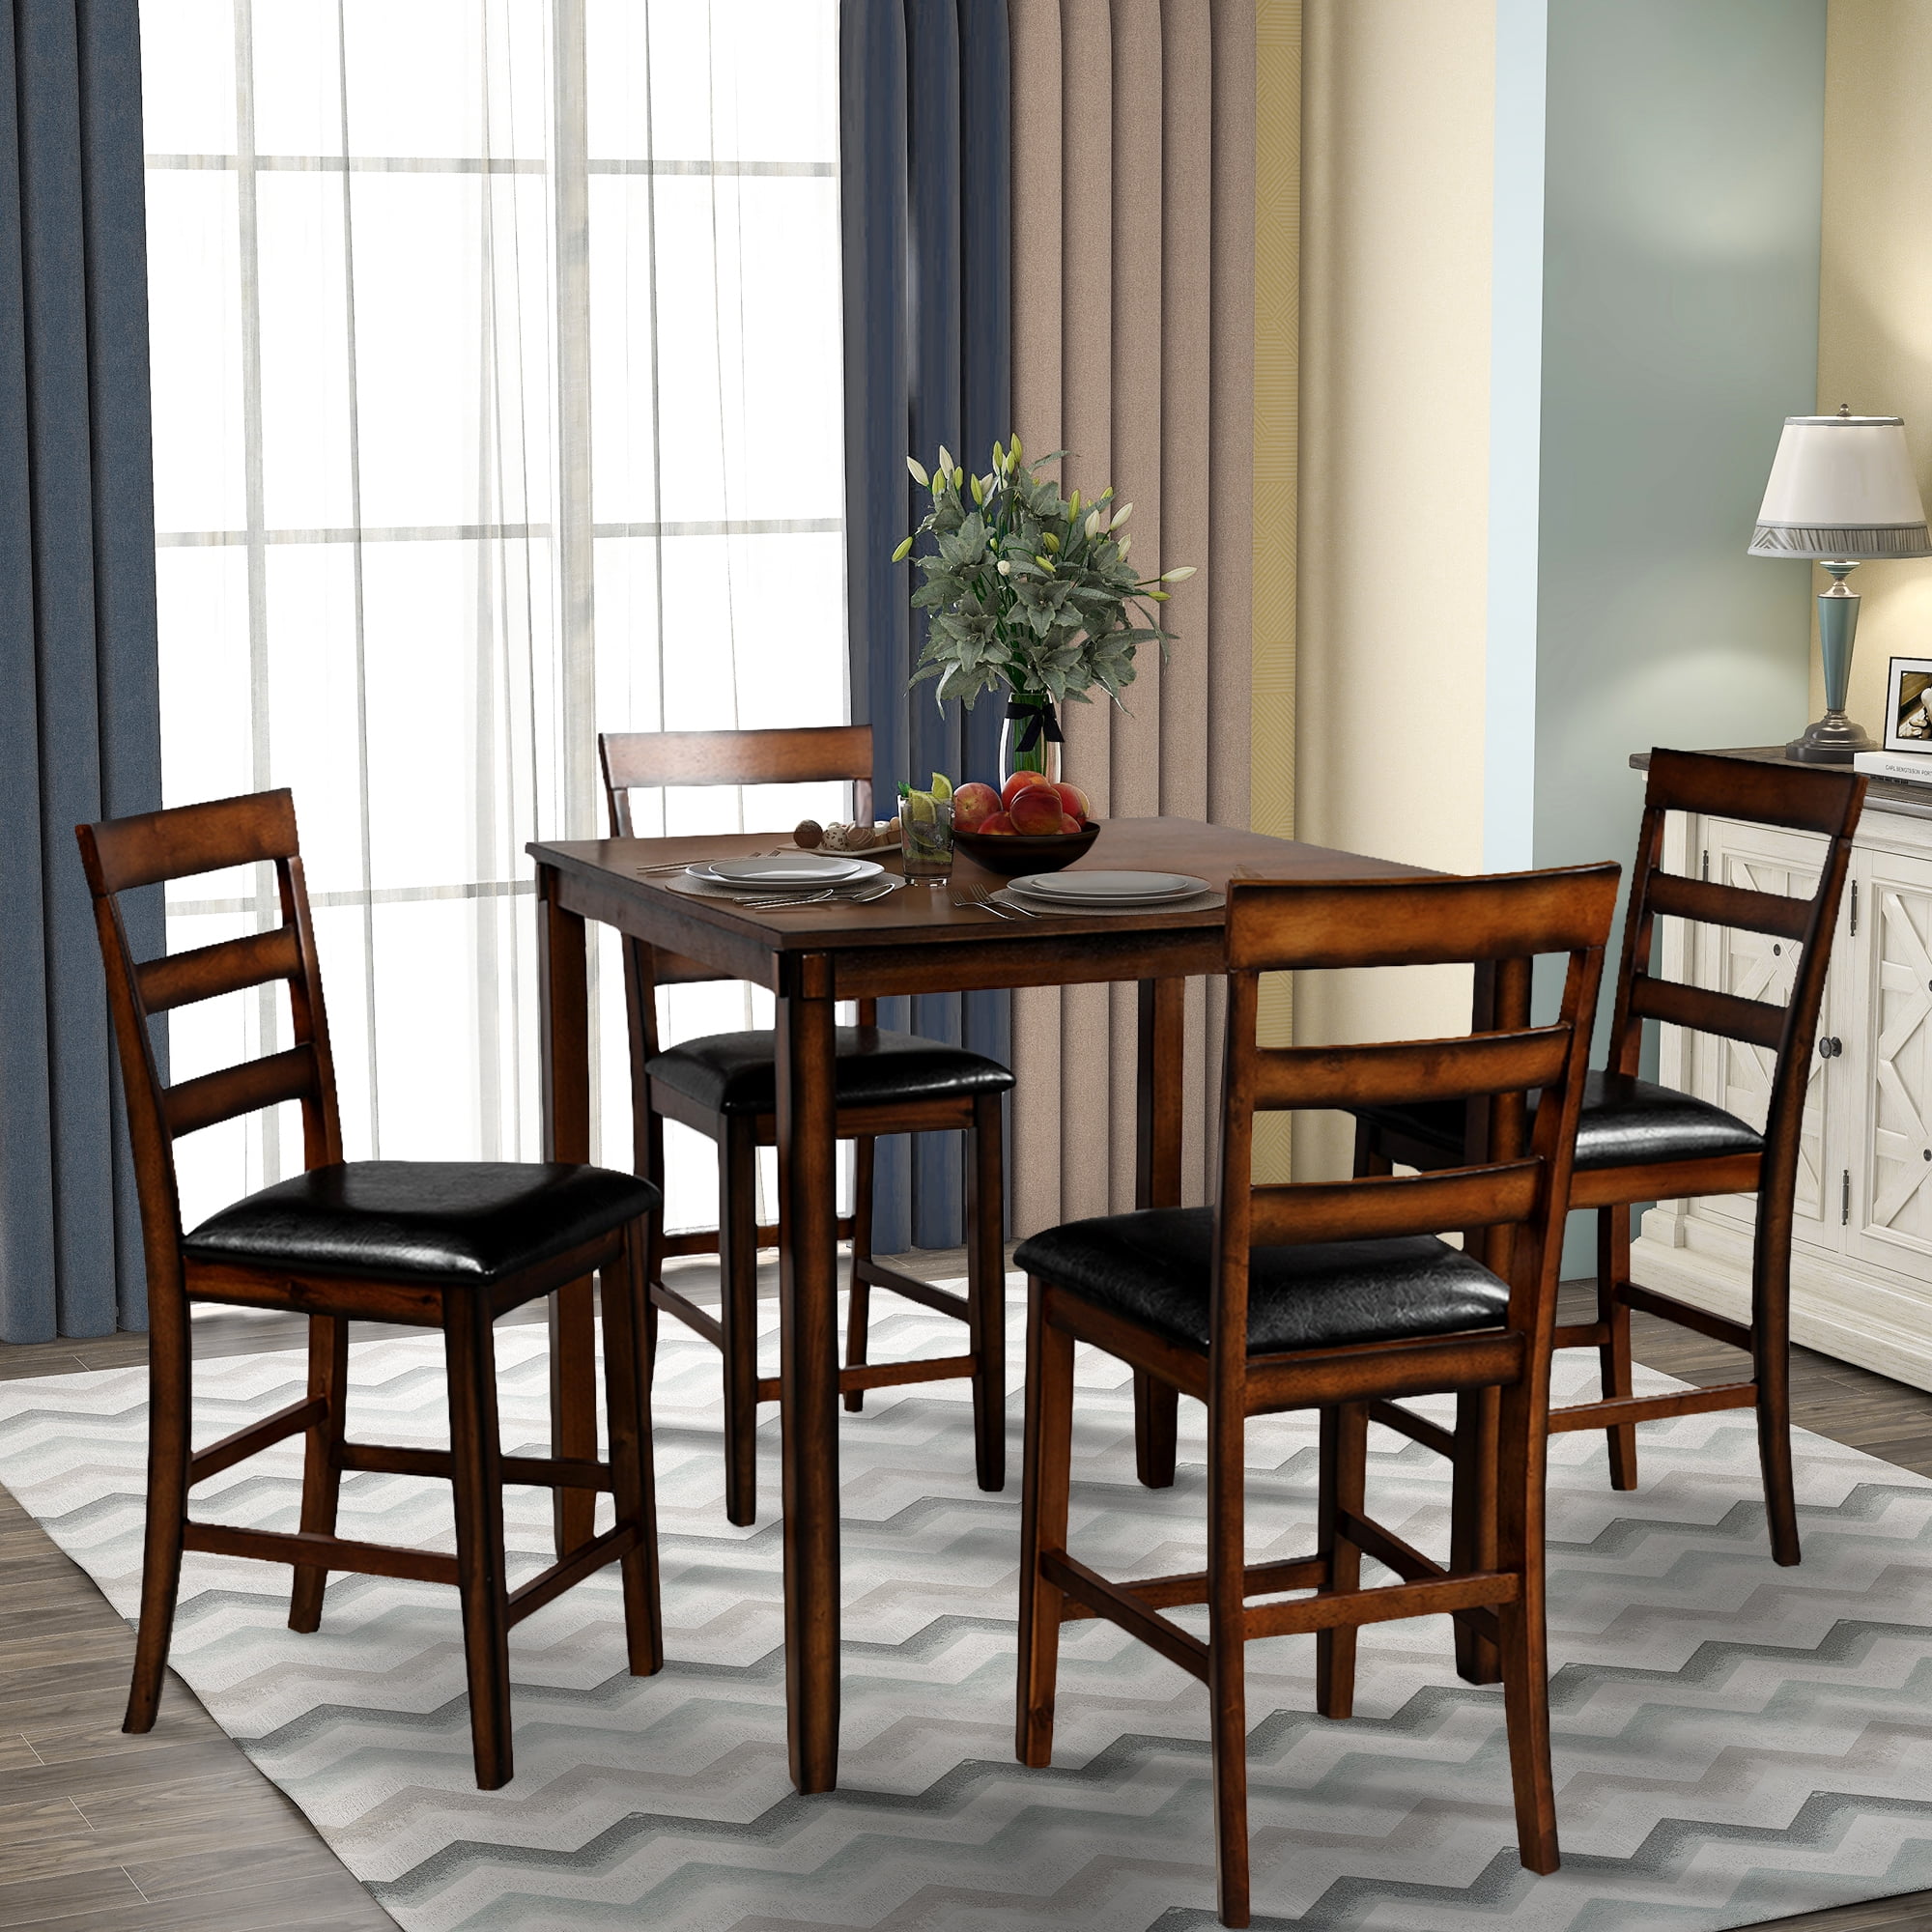 Square Counter Height Wooden Kitchen Dining Set, Dining Room Set with Table and 4 Chairs (Brown